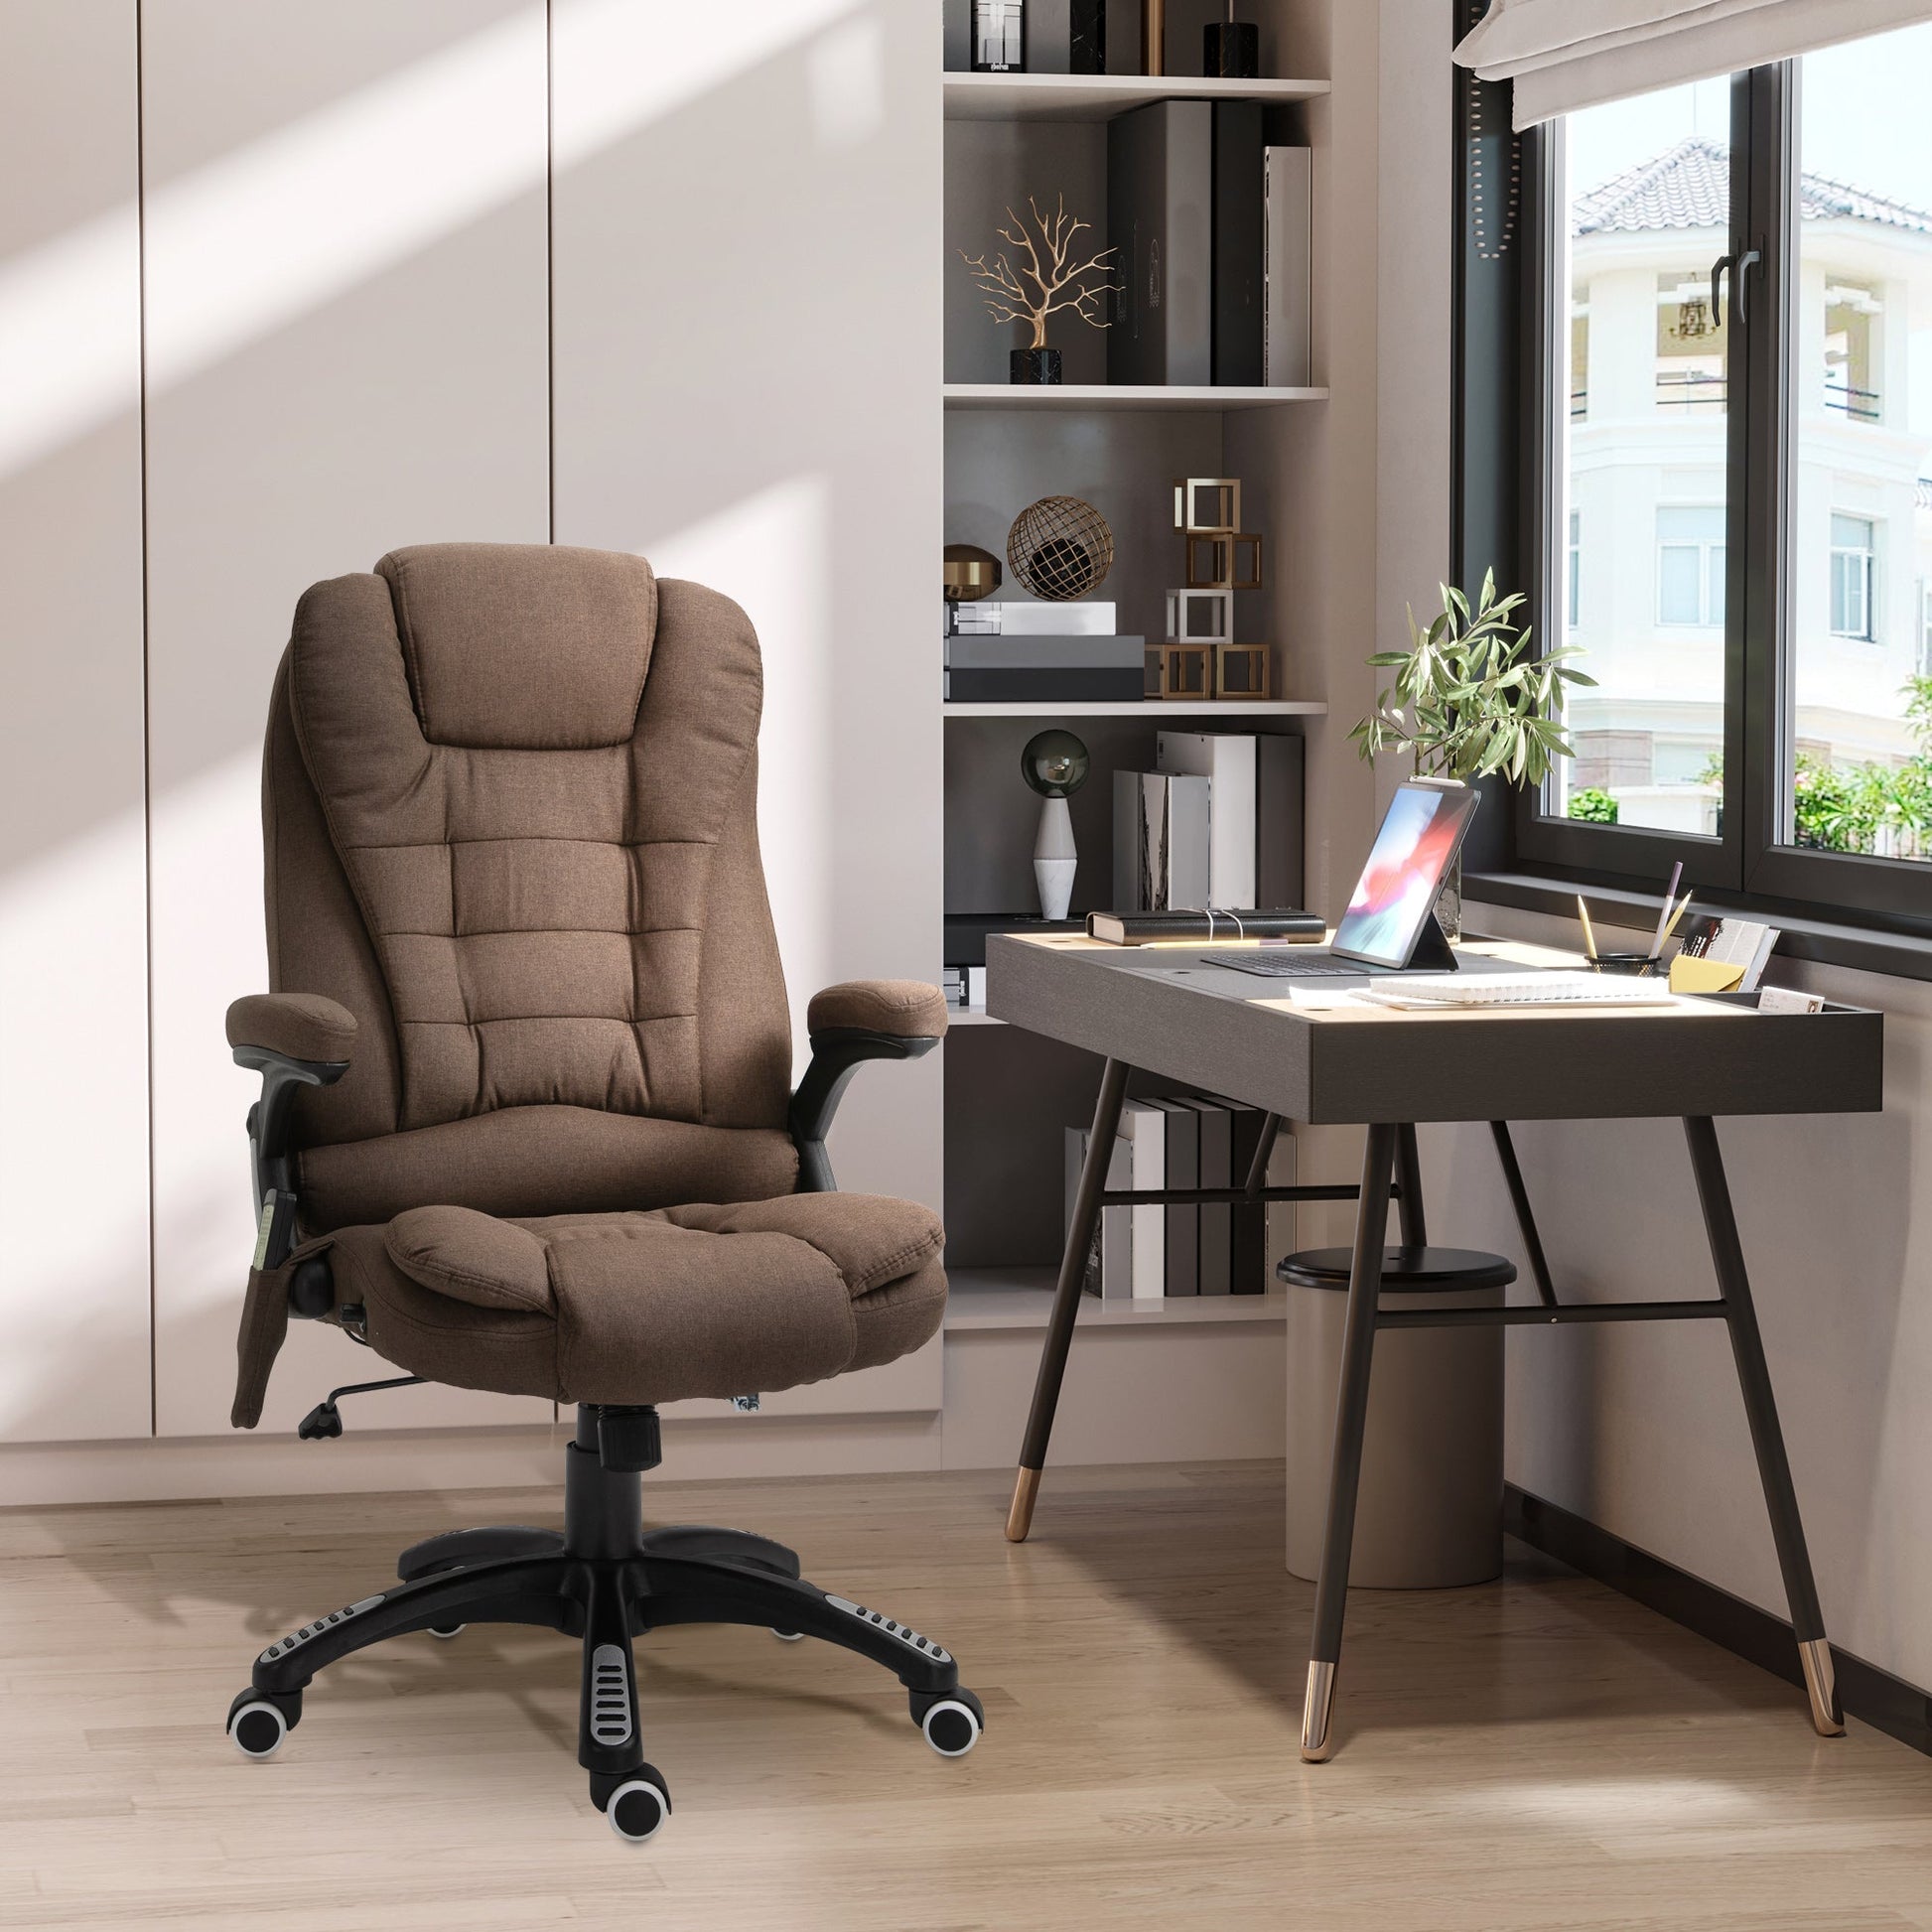 6 Point Vibrating Massage Office Chair High Back Executive Chair with Reclining Back, Swivel Wheels, Brown at Gallery Canada